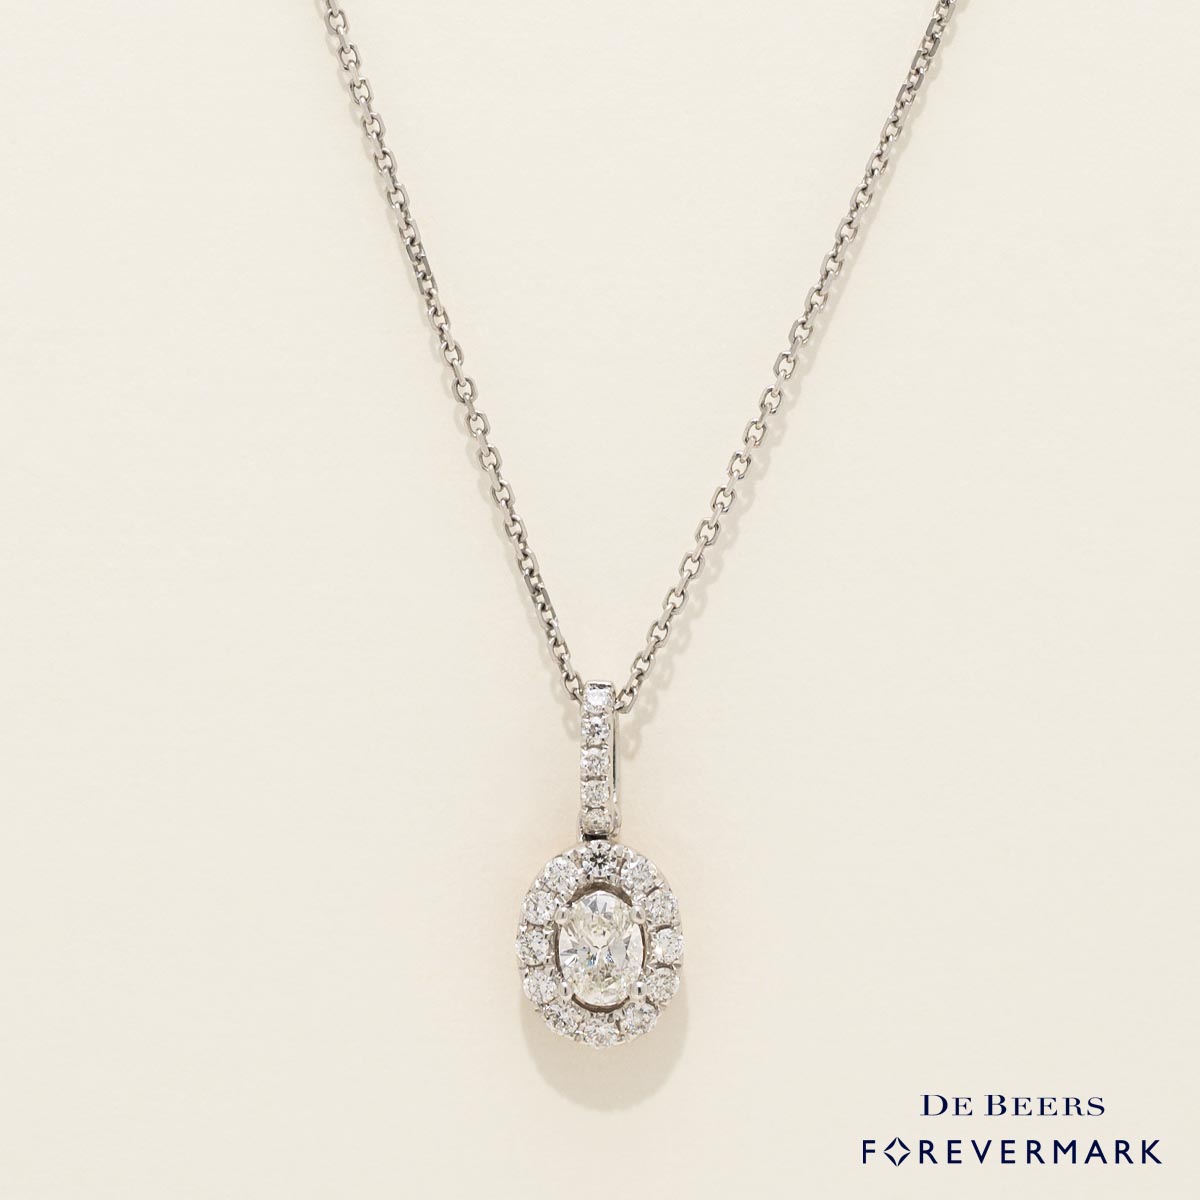 De Beers Forevermark Center of my Universe Oval Diamond Halo Necklace in 18kt White and Rose Gold (1/2ct tw)